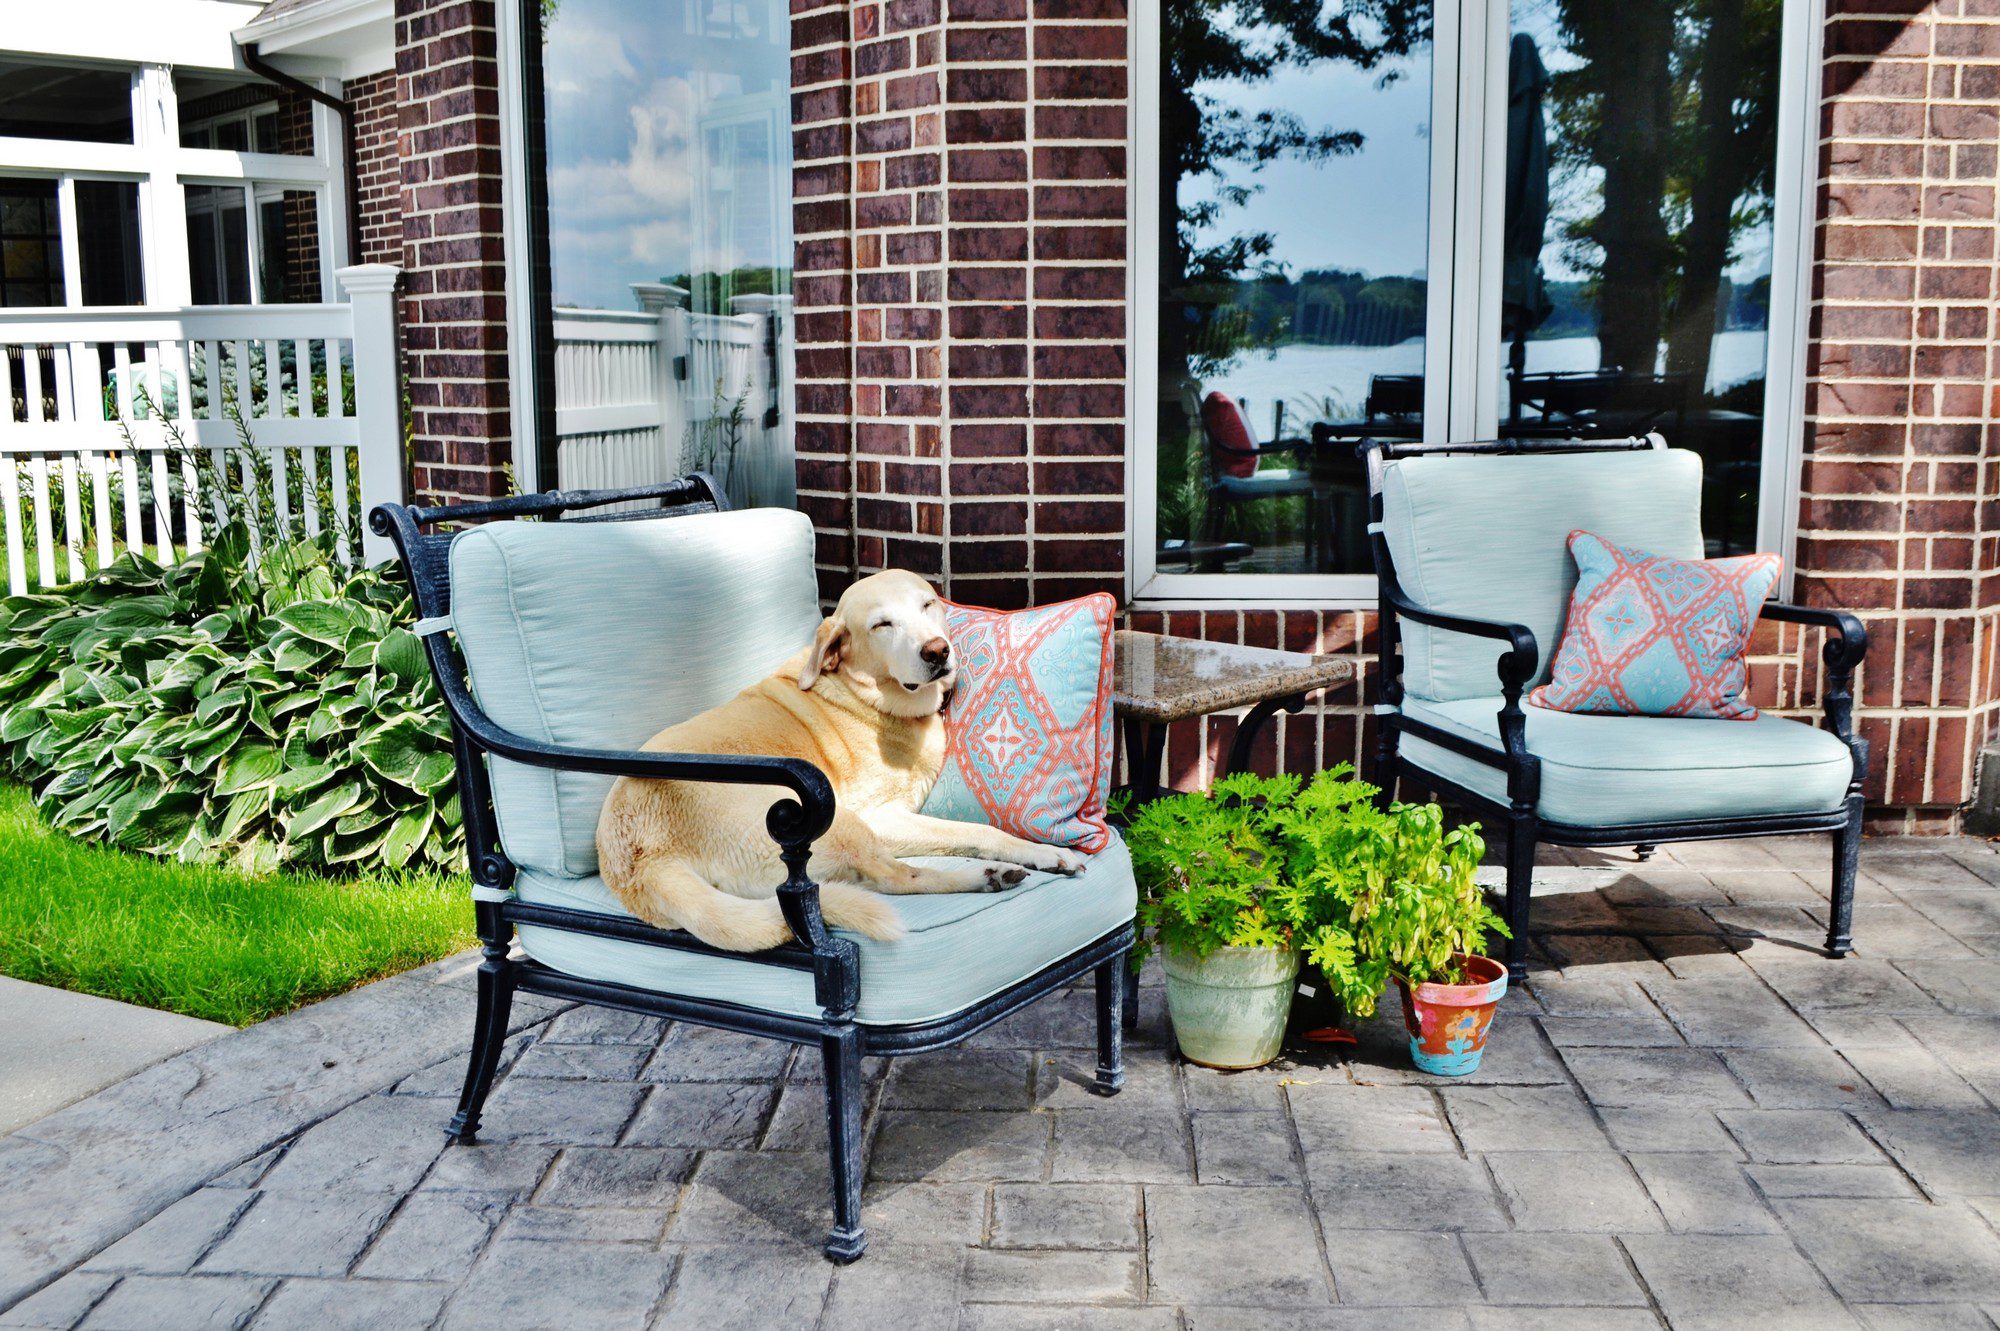 This is an image of a dog lounging on an outdoor armchair with cushions on a patio. The patio is paved with stone tiles, and there's another similar armchair next to it. The house has a brick exterior, and there are plants in the background as well as potted plants beside the chairs. It appears to be a pleasant, sunny day, and the dog seems quite relaxed. Beyond the patio, through the reflection in the glass door, a body of water and a distant treeline can be seen, suggesting this house is lakefront or has a water view.